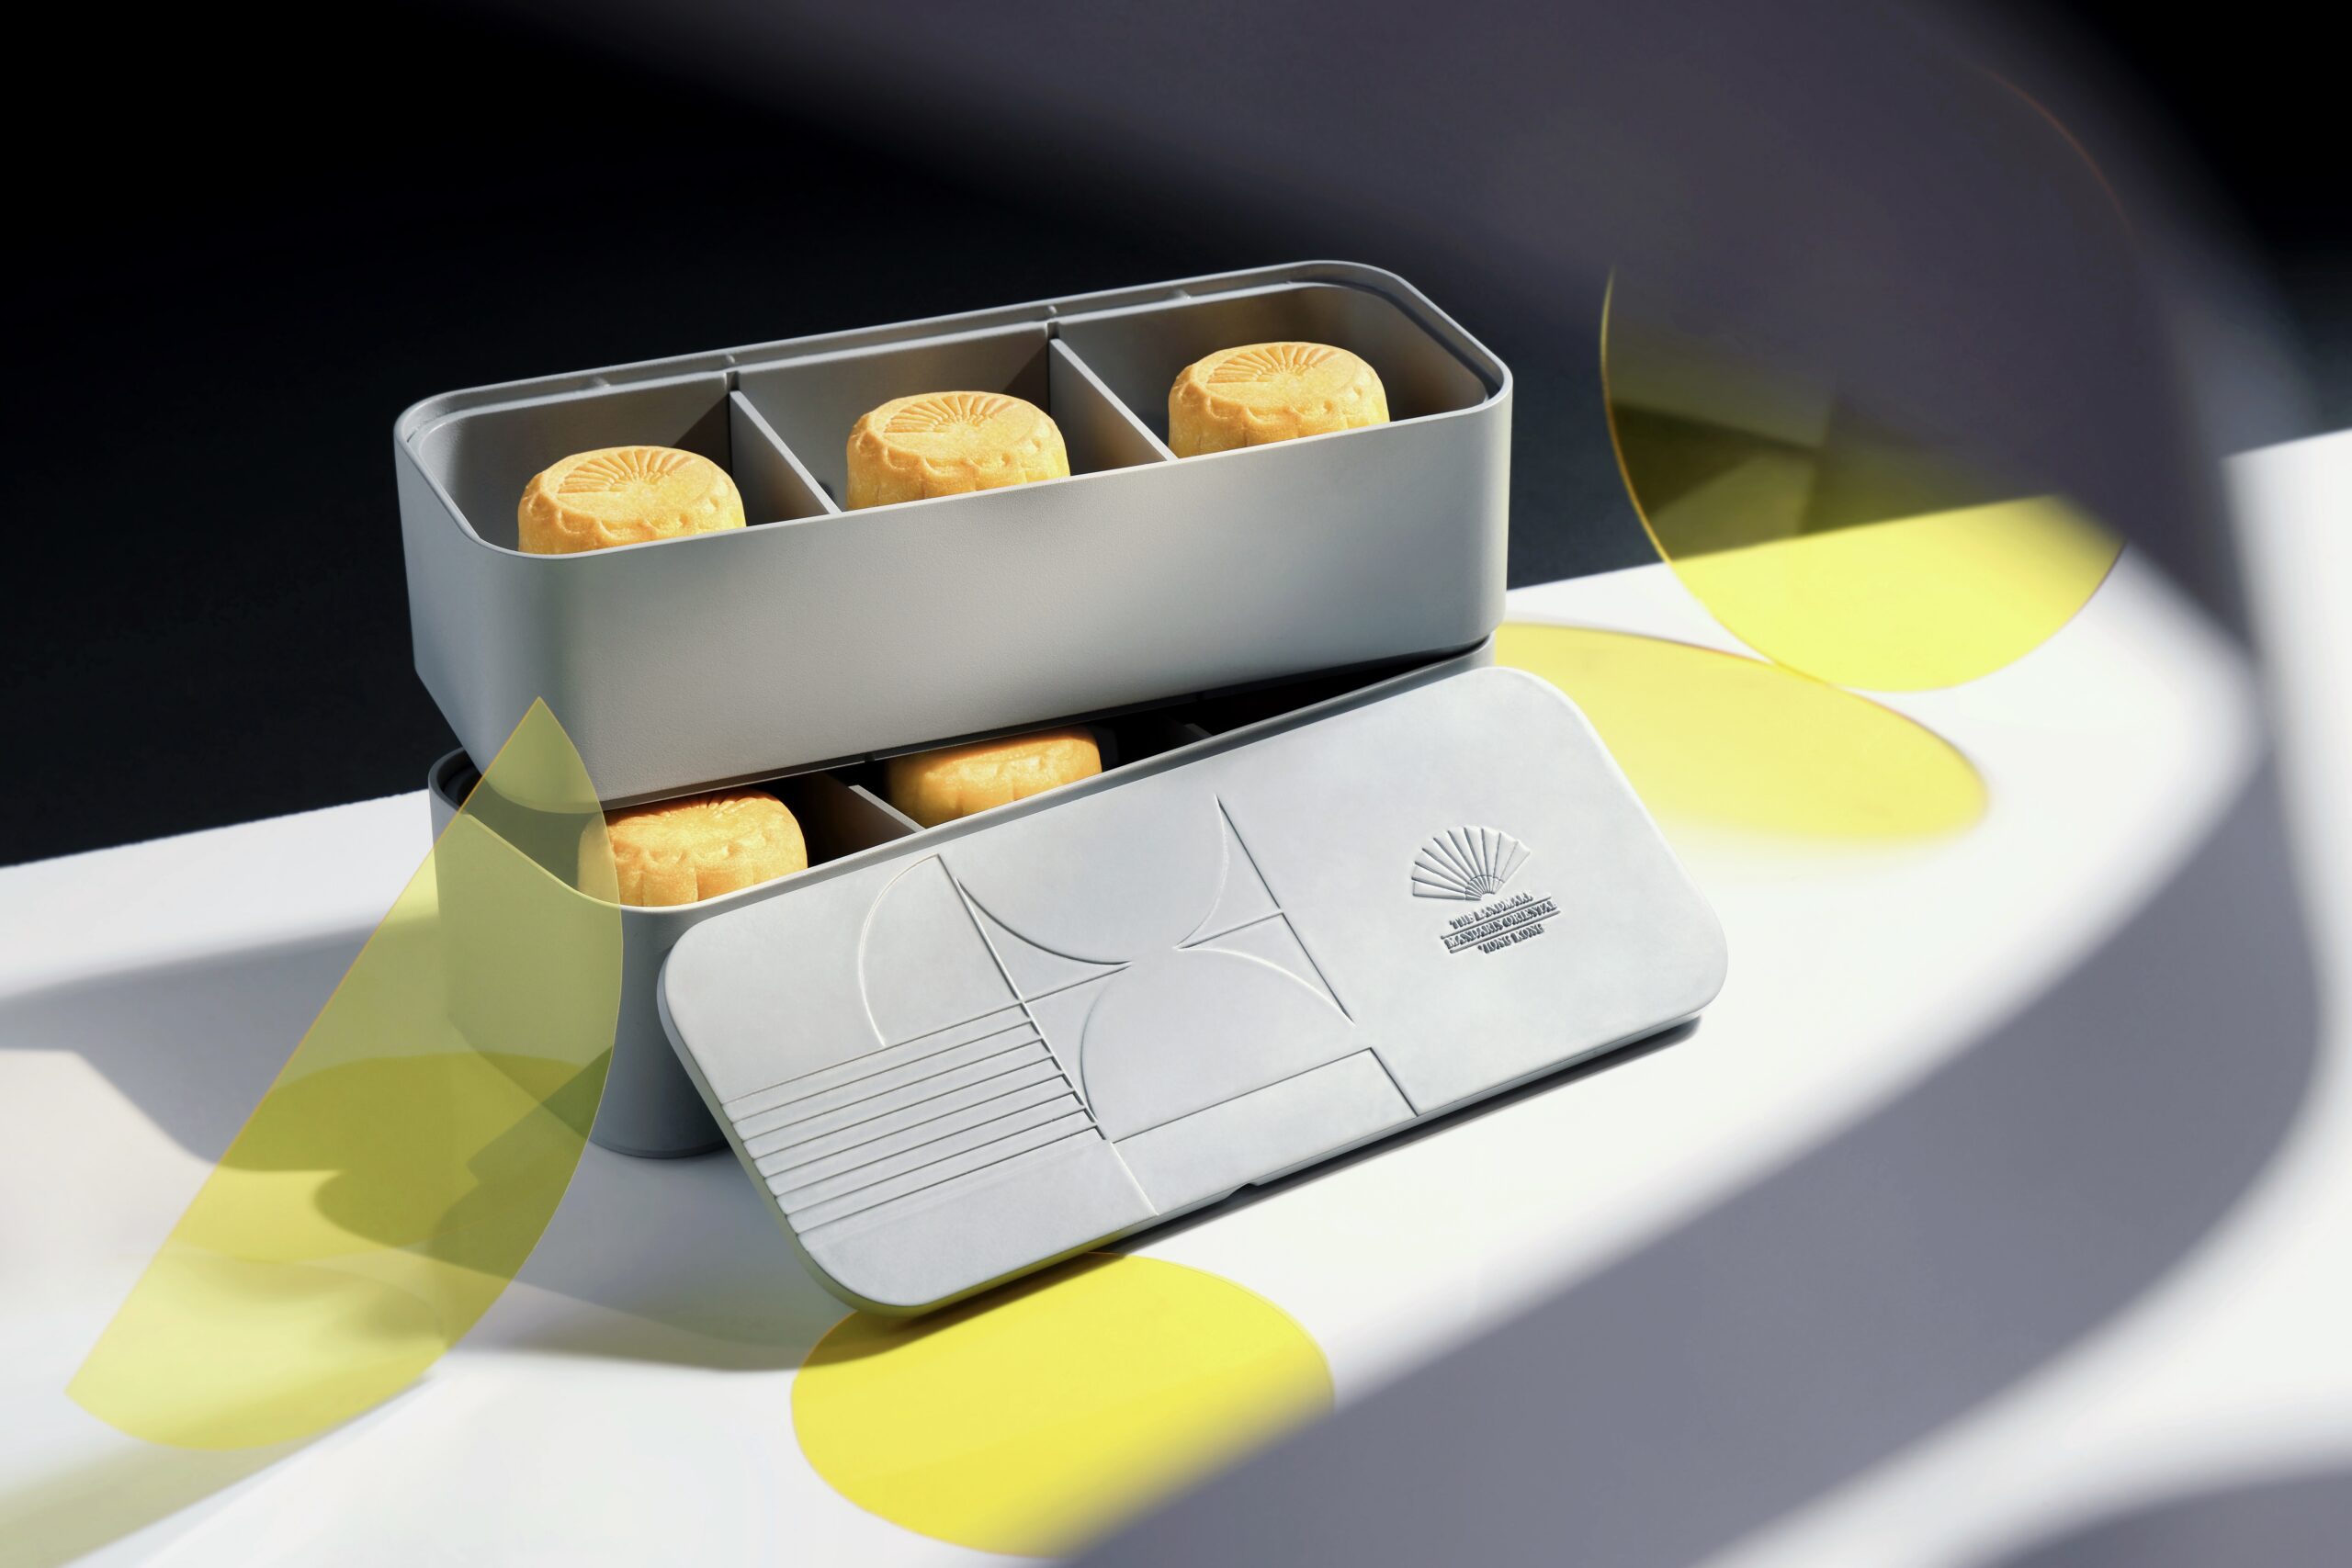 A light grey double-decker partitioned bento box with mooncakes sits on a table. The top level of the box is completely uncovered to reveal three mooncakes within. It sits upon the lower level of the bento box, which contains partially obscured mooncakes. The lid of the box is propped against the bottom level to show the logo of the Landmark Mandarin Oriental. There are neon yellow wrappers strewn around the box, which is placed on a white table top.